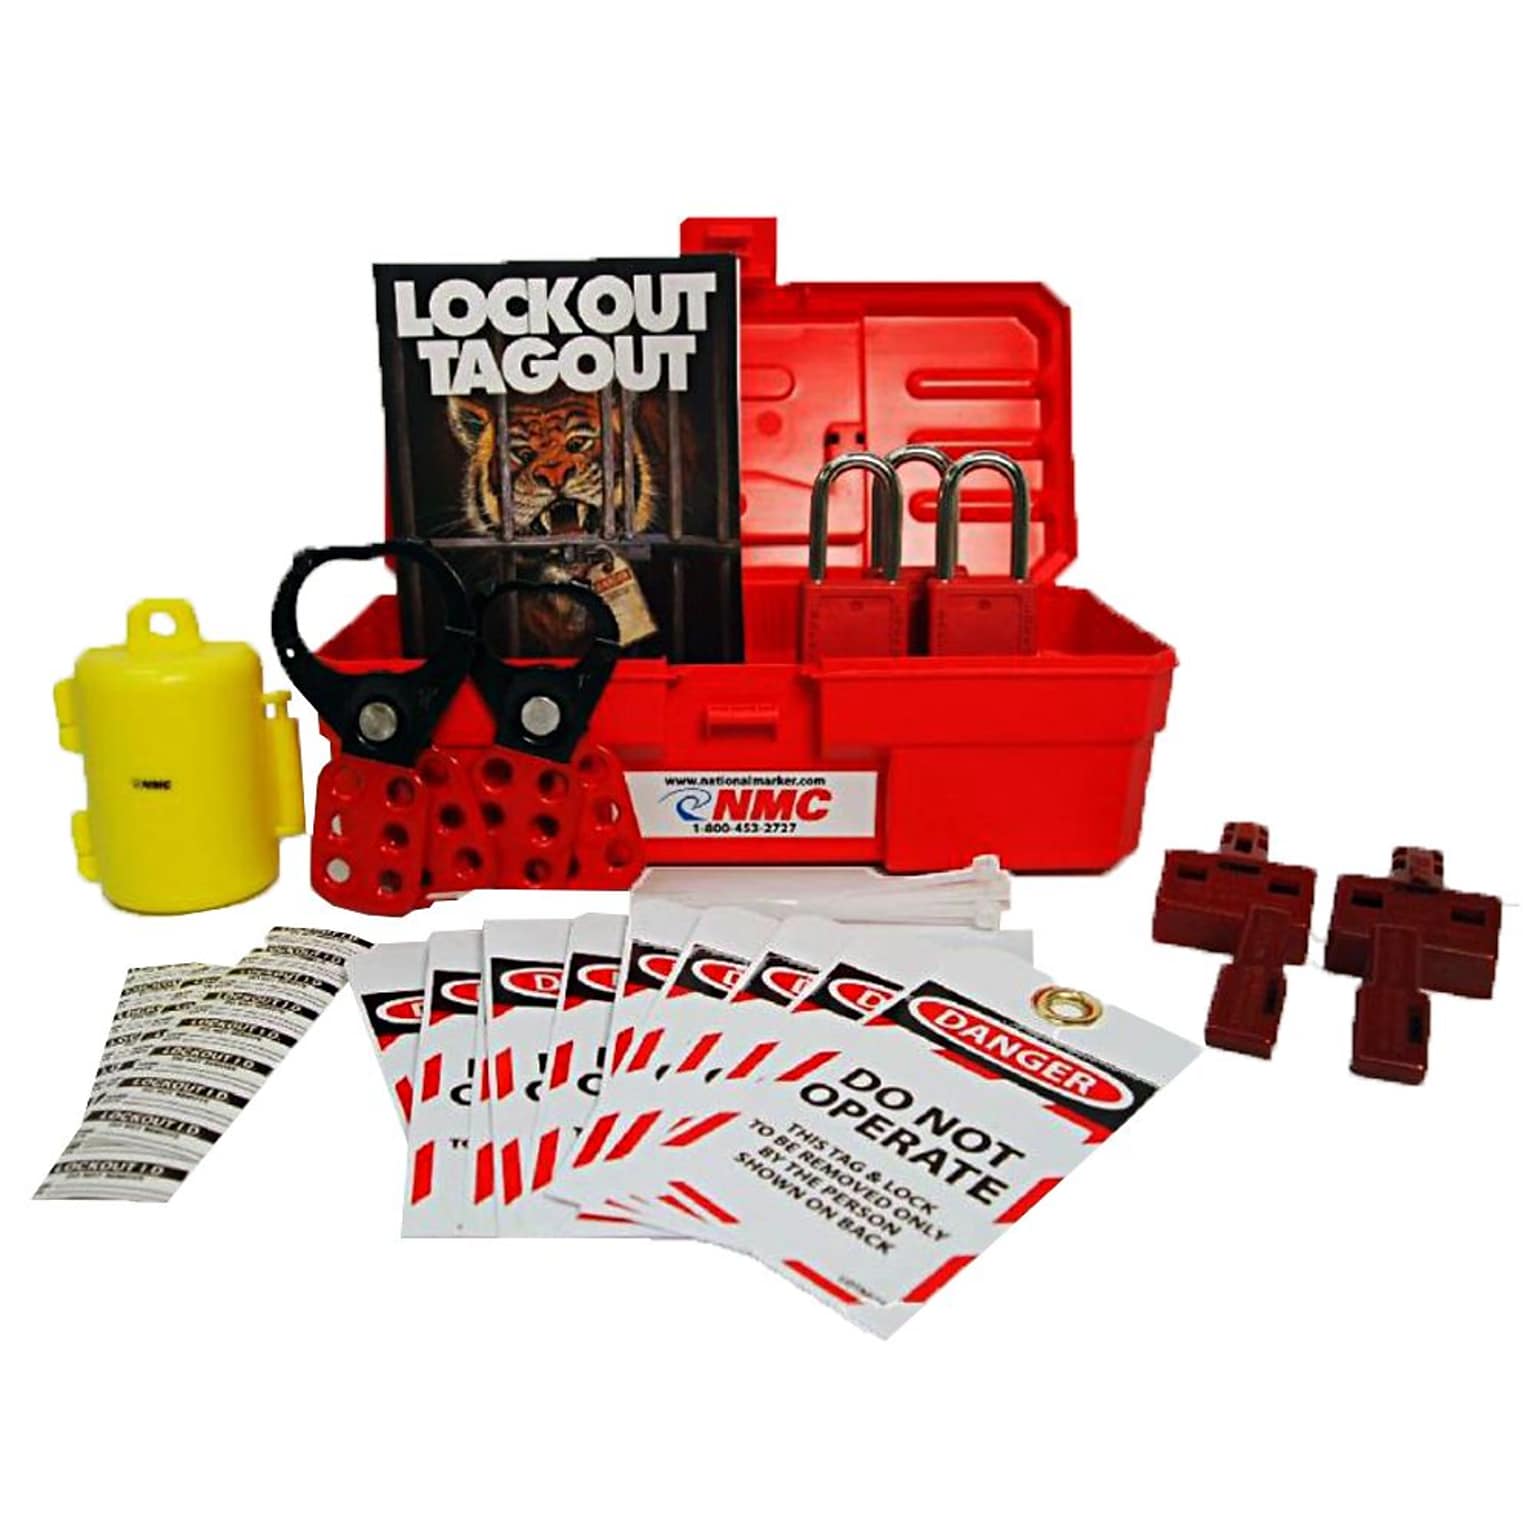 Electrical Lockout Center, Complete Yellow Board, Wire Basket, Tool Box And Contents, 16 X 14